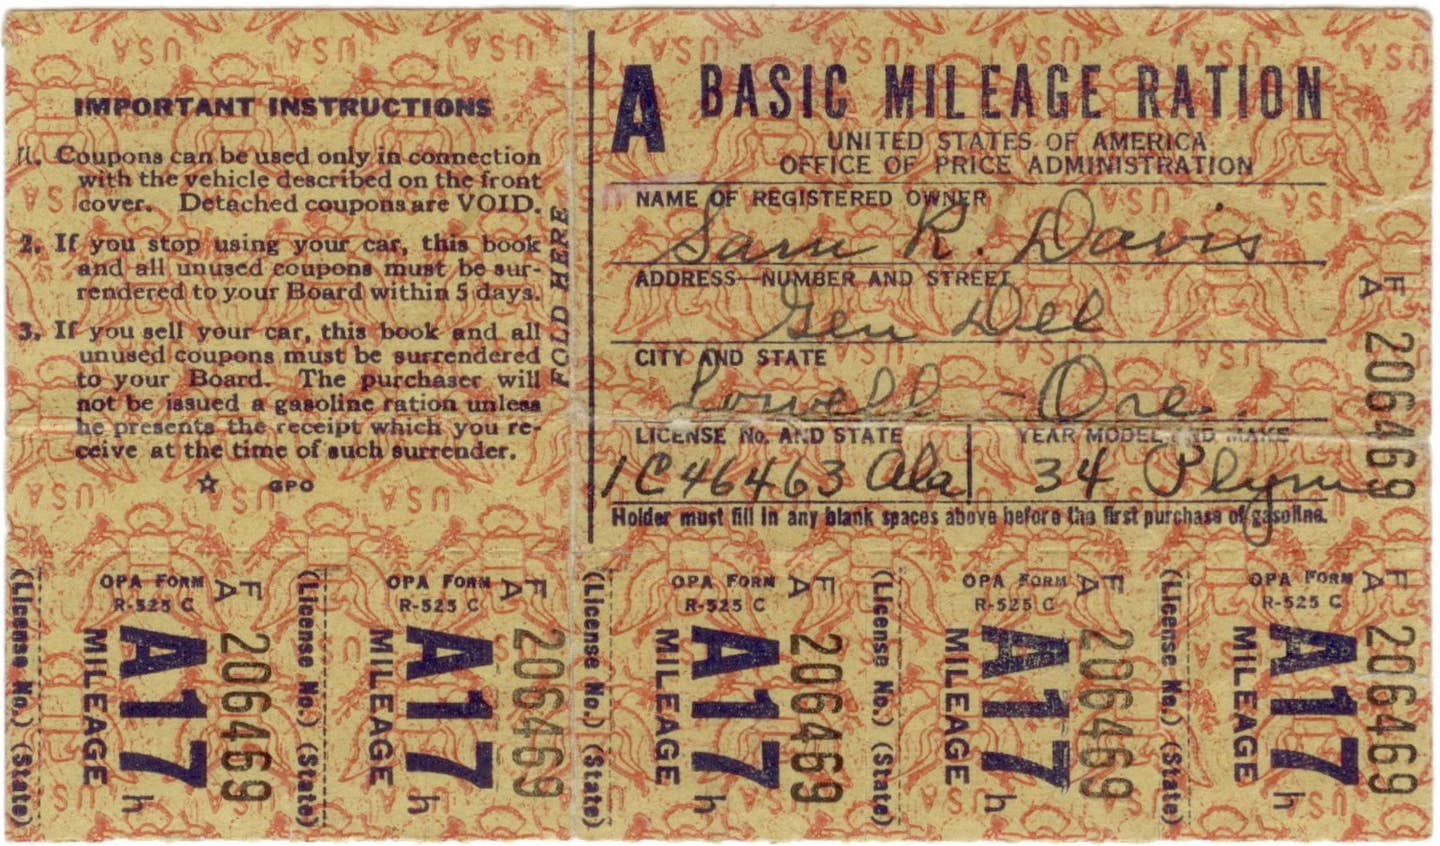 A ration book for gasoline in the United States. Ironically, the purpose was to conserve tires. (Wikimedia Commons)